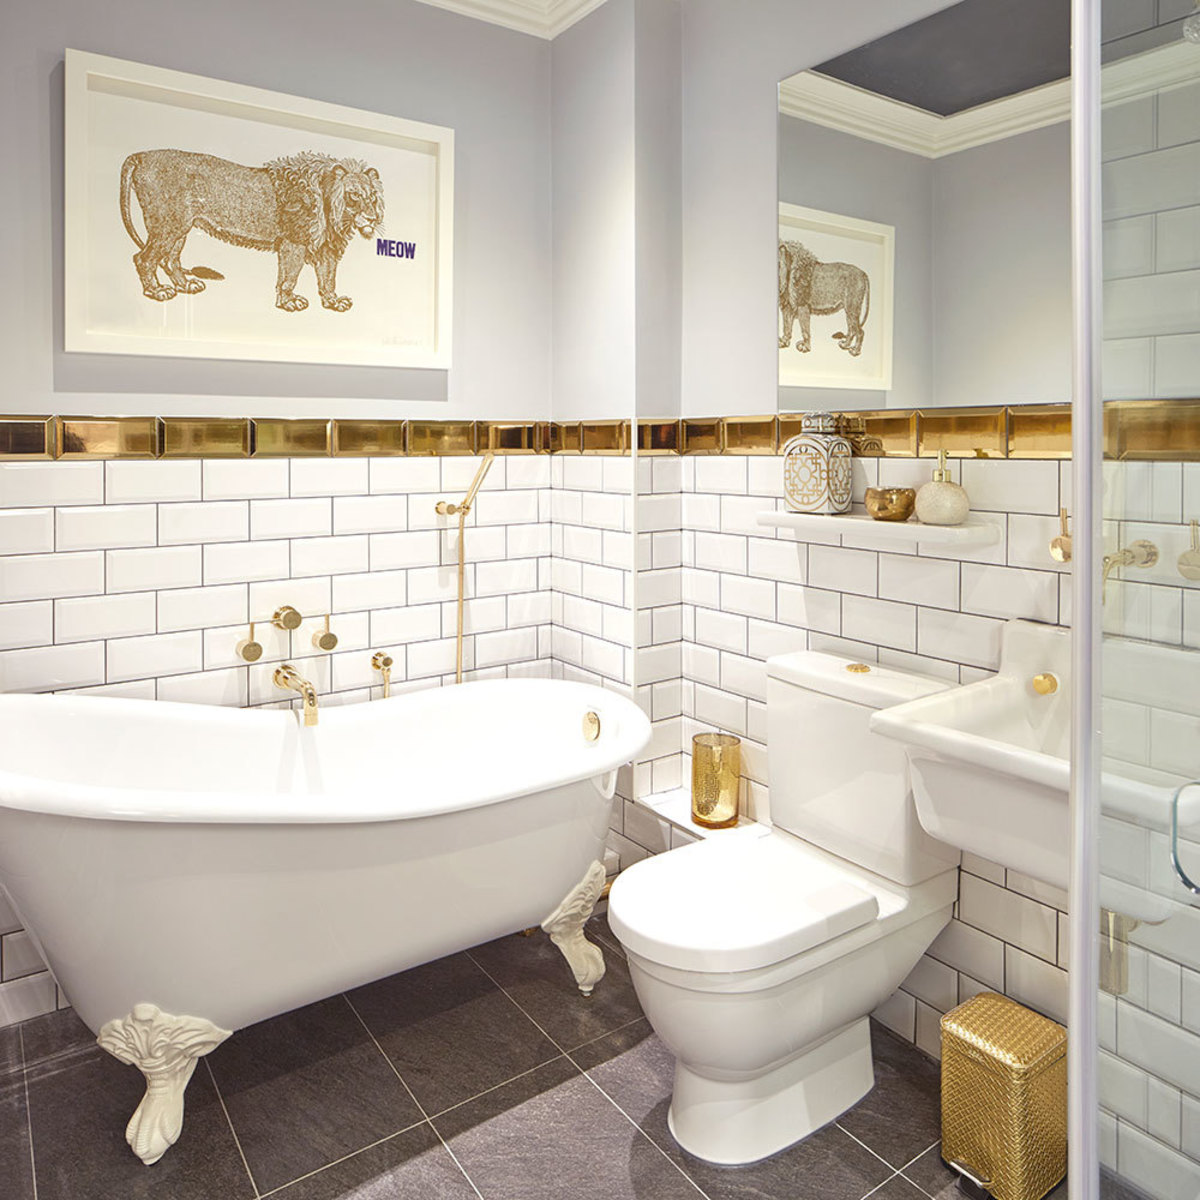 A metal feng shui bathroom shouldn't be too hard to design. A bathroom should at the very least already have plumbing. This bathroom added golden touches.